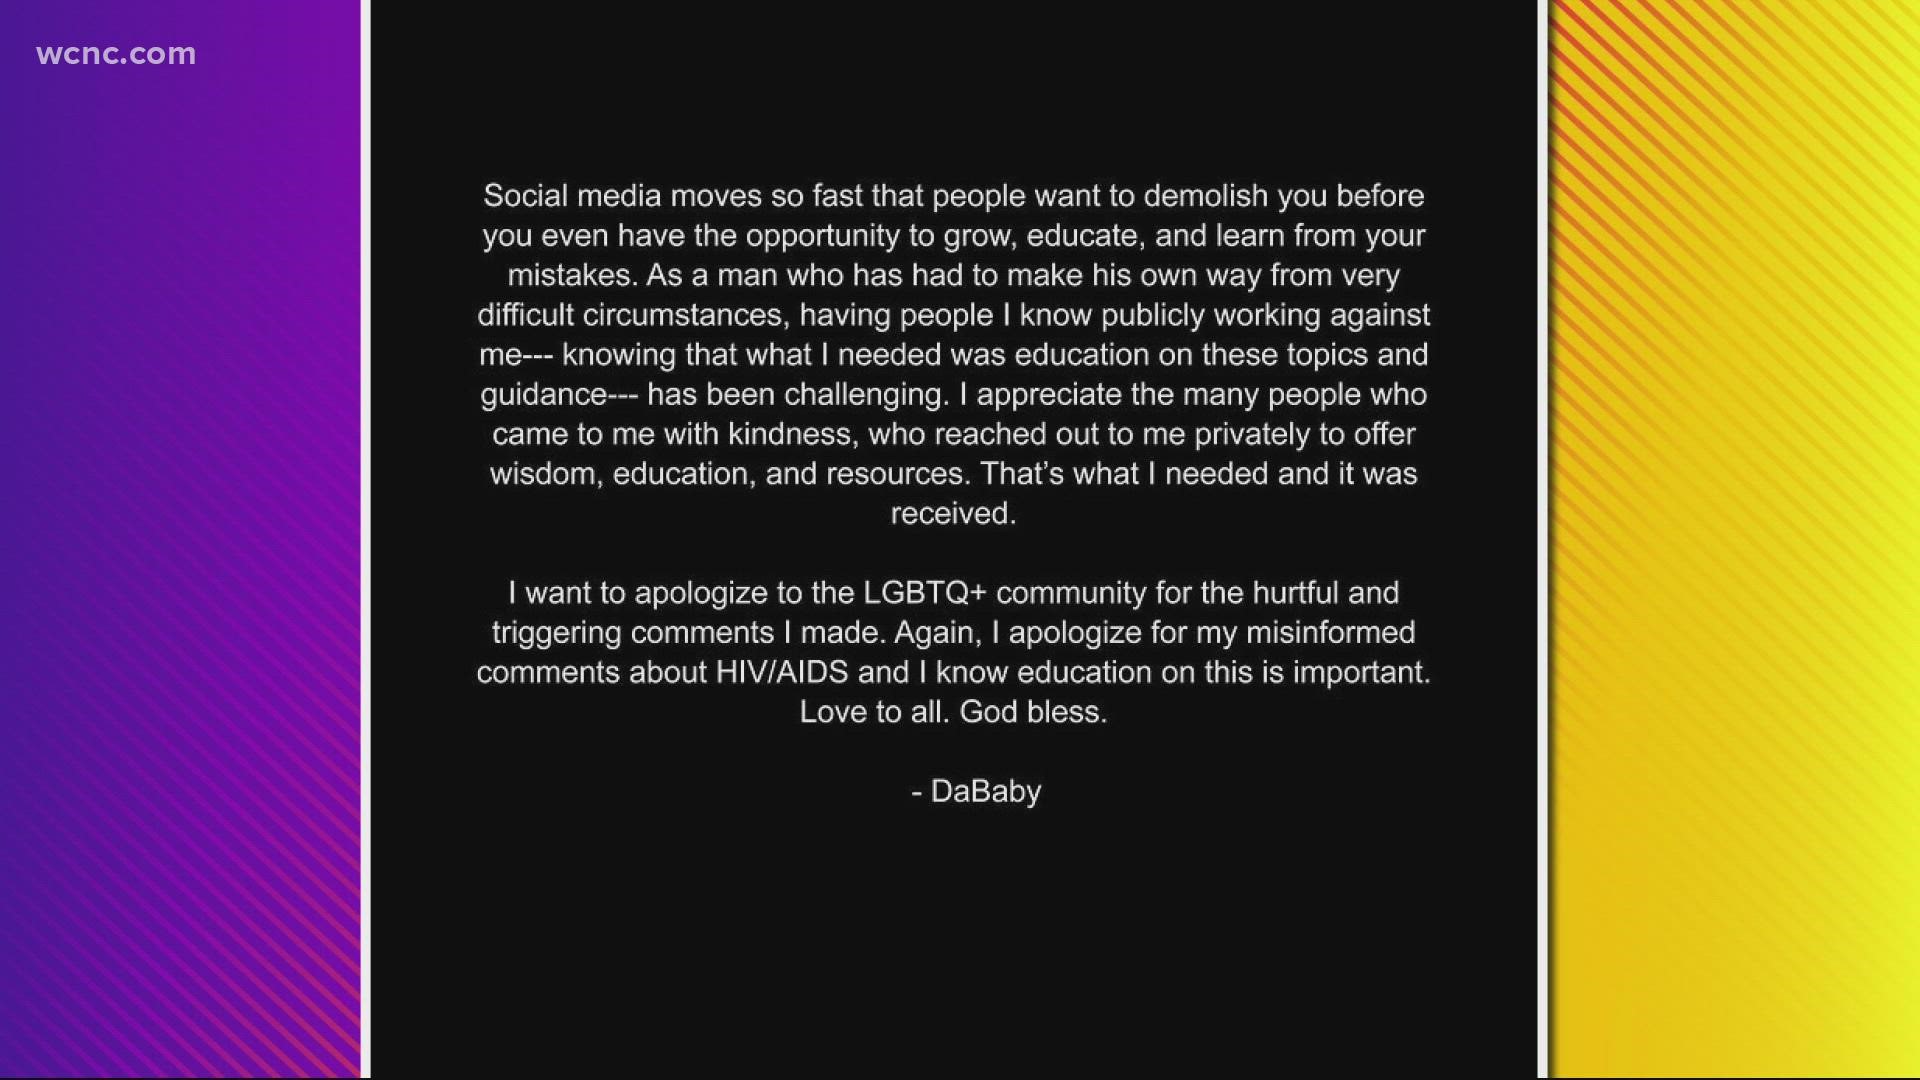 The Charlotte-based rapper posted an apology on Instagram, saying in part that he was sorry for his misinformed comments and that "education on this is important."